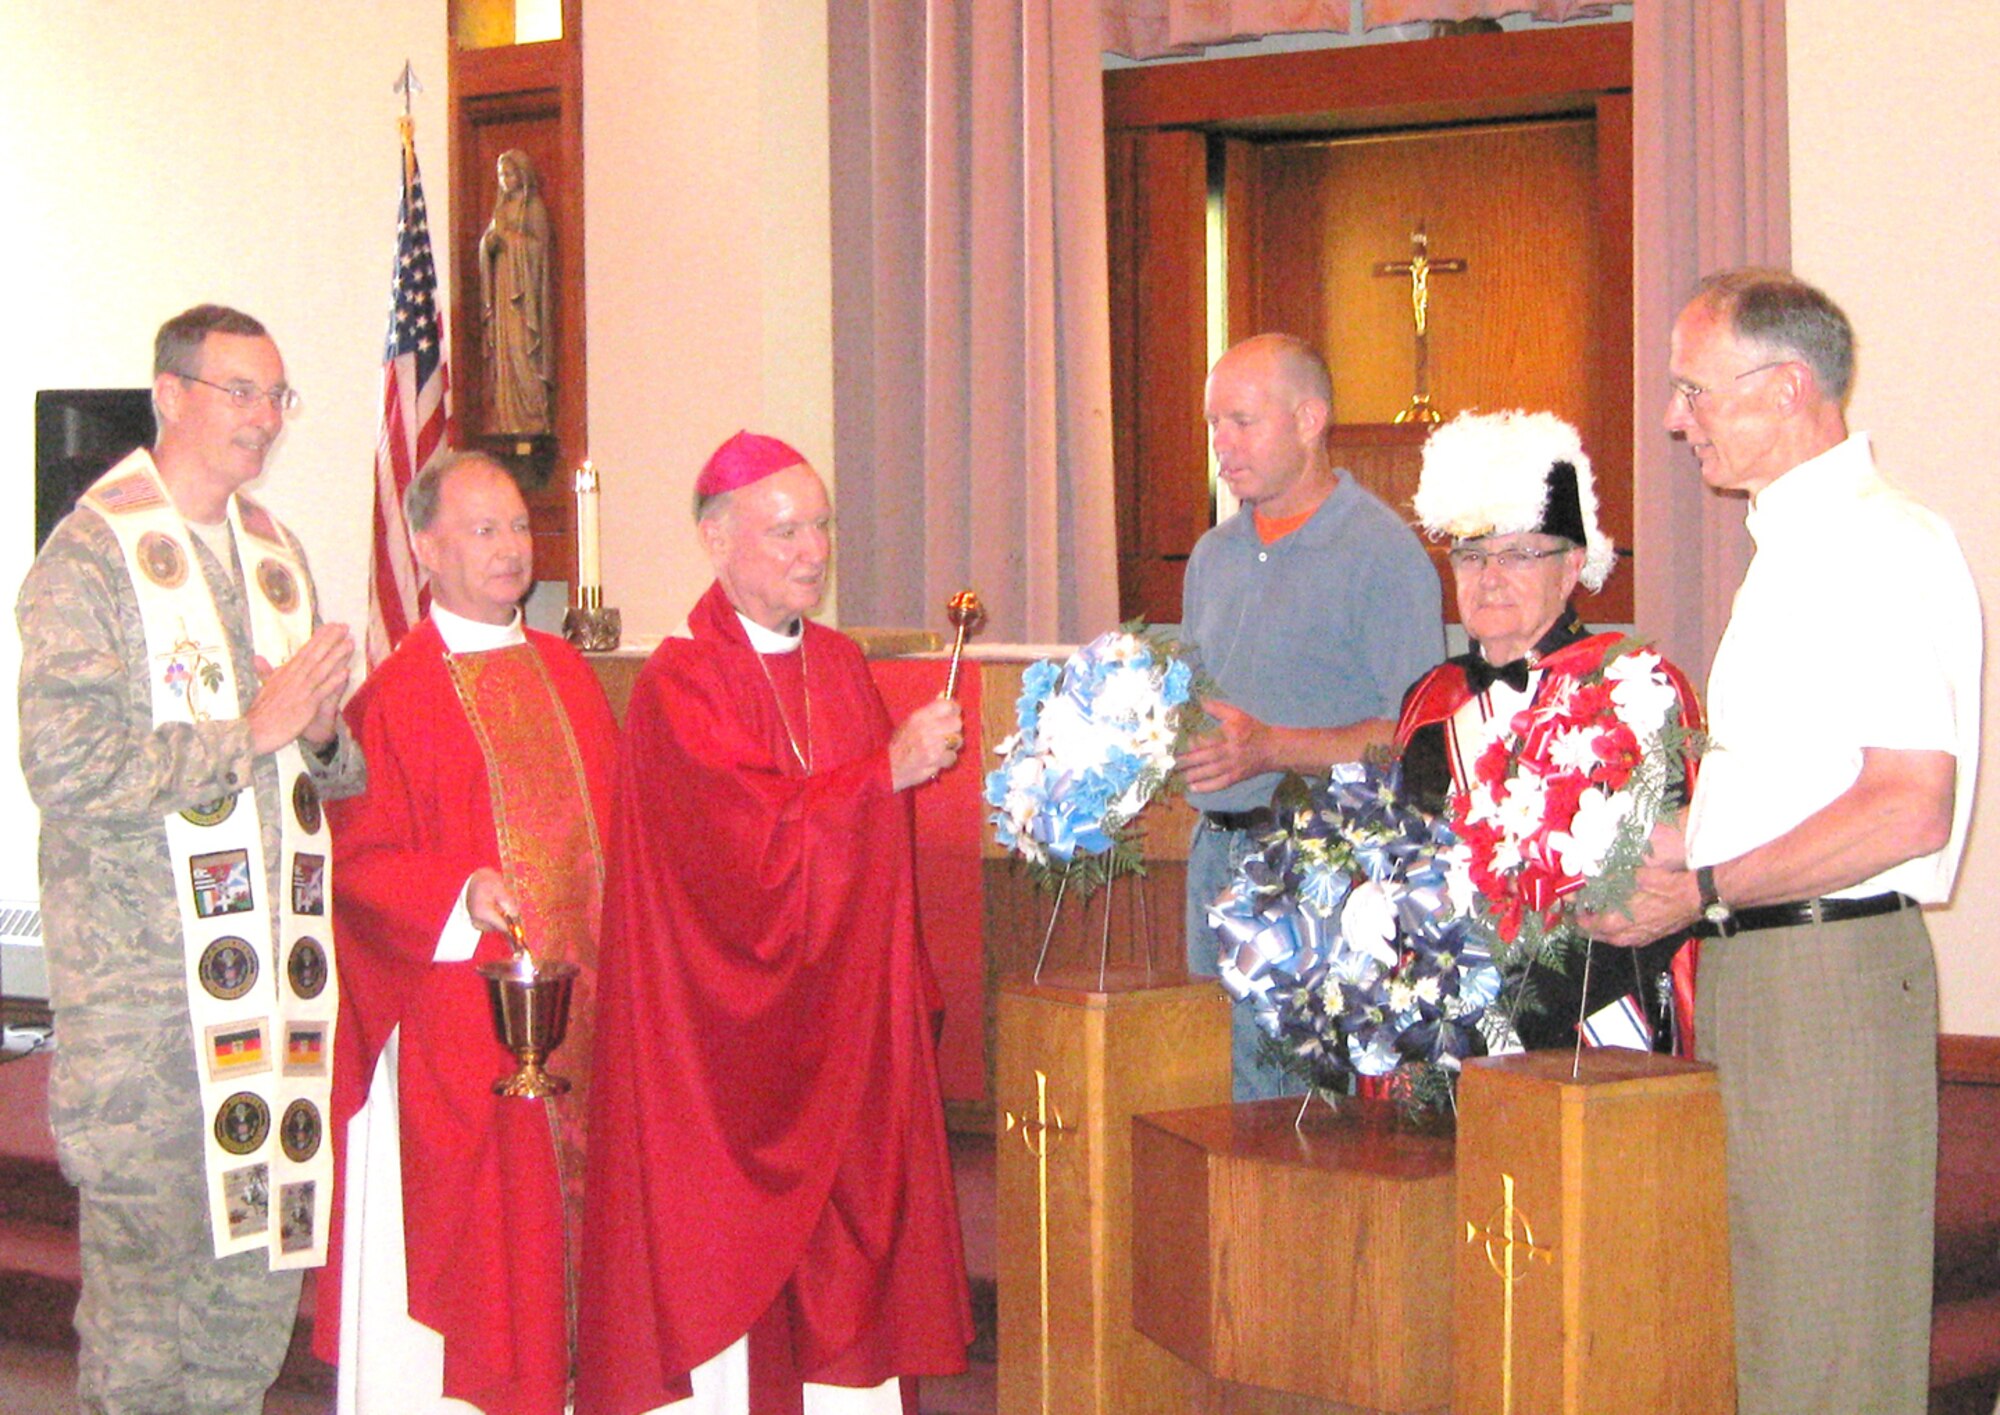 More than 130 members and various delegations from the military community and Knights of Columbus, a chapel organization, placed wreaths to celebrate an early remembrance of Memorial Day at the Carpenter Memorial Chapel, Dover Air Force Base, DE, May 22. (Left to right) Chaplain (Maj.) Timothy Hirten, 436th Airlift Wing chaplain, Chaplain (Lt. Col.) Jack Mink, Delaware Air National Guard Wing Chaplain, Bishop Francis Malooly, Diocese of Wilmington, Master Sgt. Alan Claycomb, 512th Maintenance Group, Bill Wade, Knights of Columbus, a chapel organization, and retired Lt. Col. Steven Welde. (Courtesy photo)